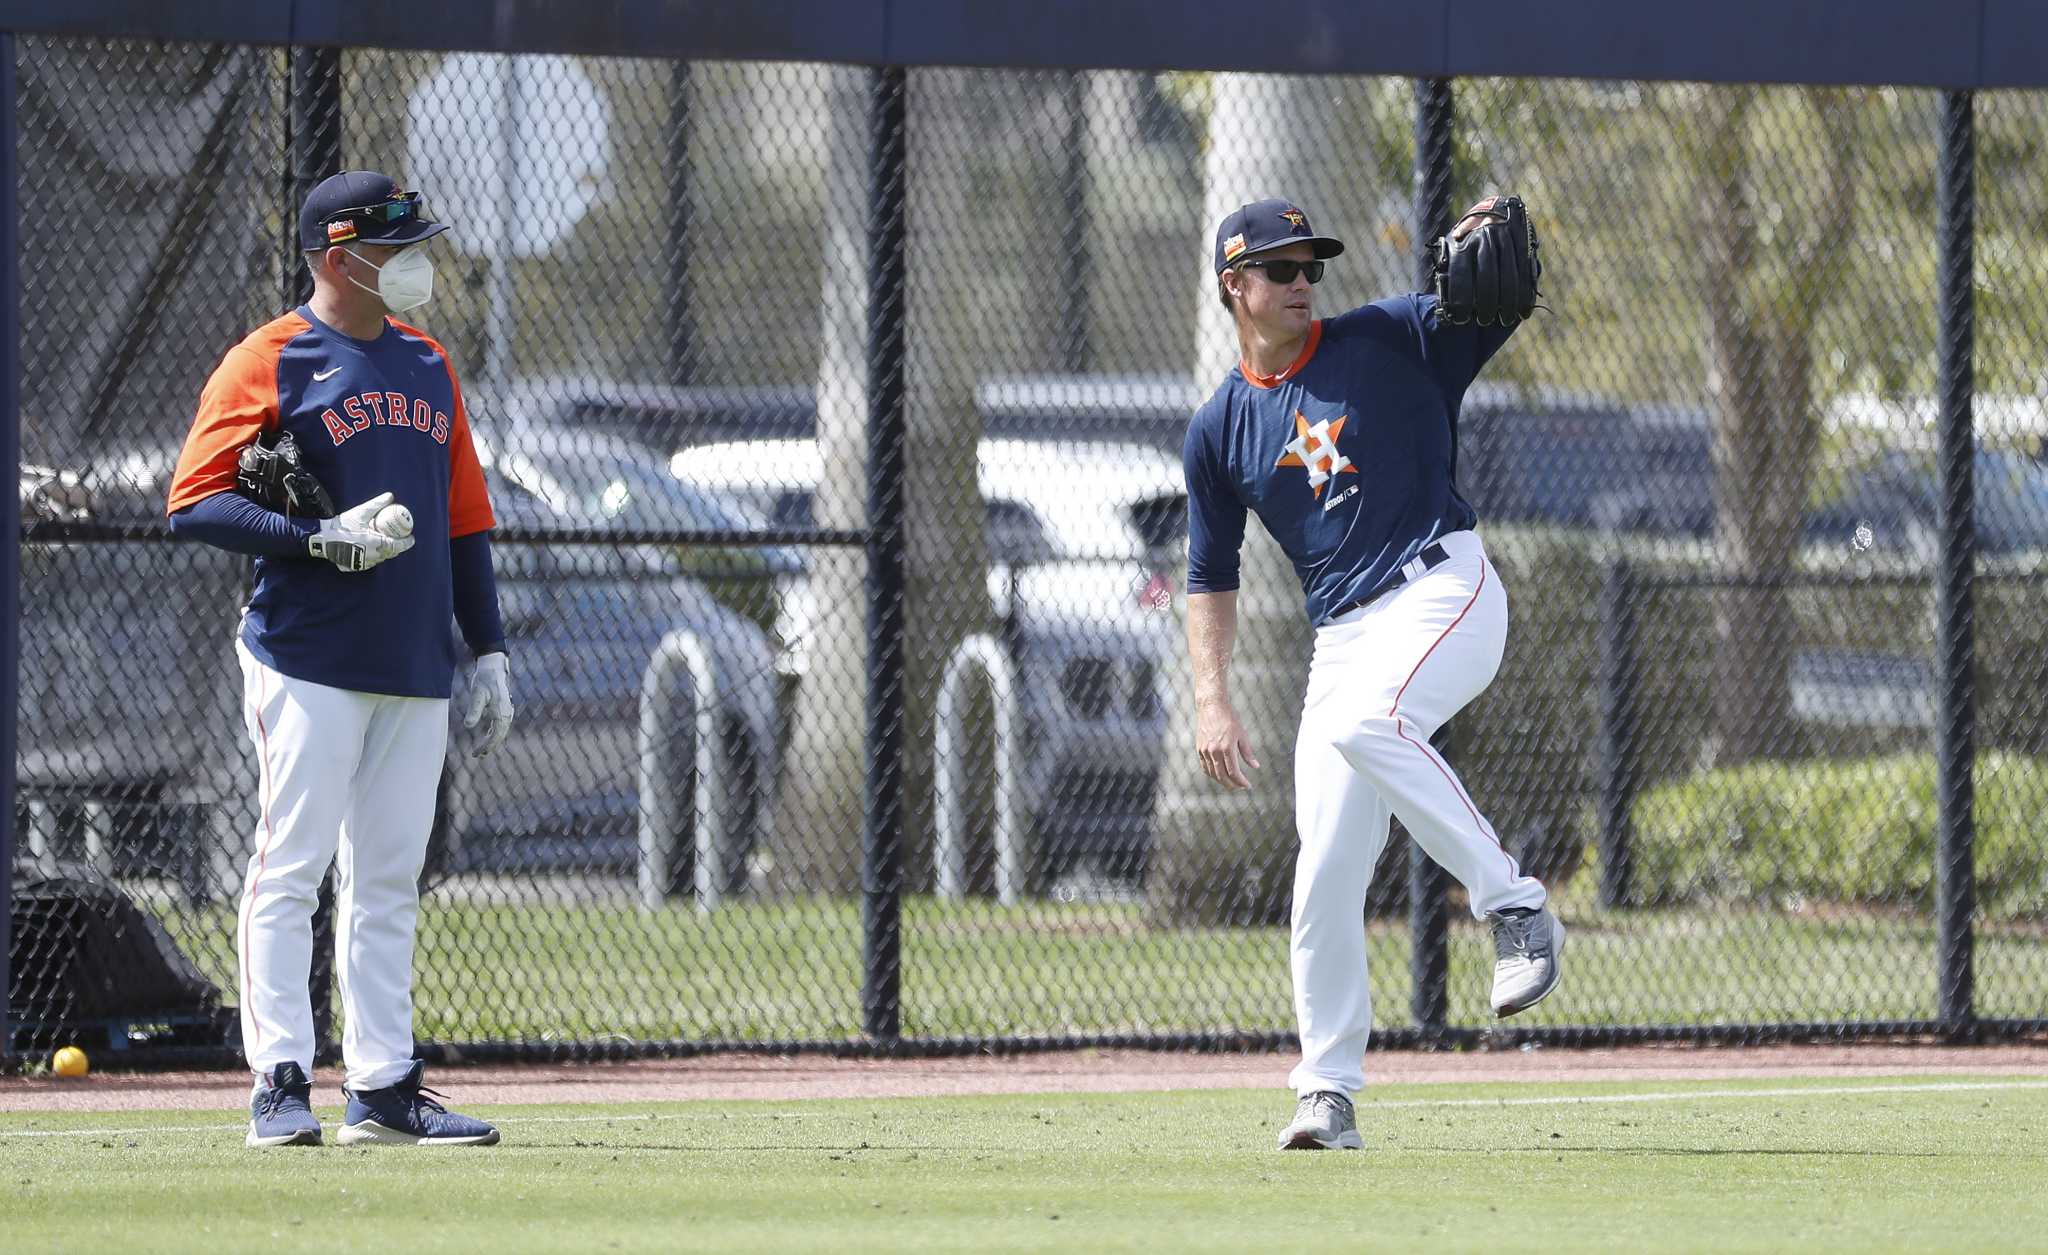 Houston Astros: Zack Greinke continues to impress in Spring Training